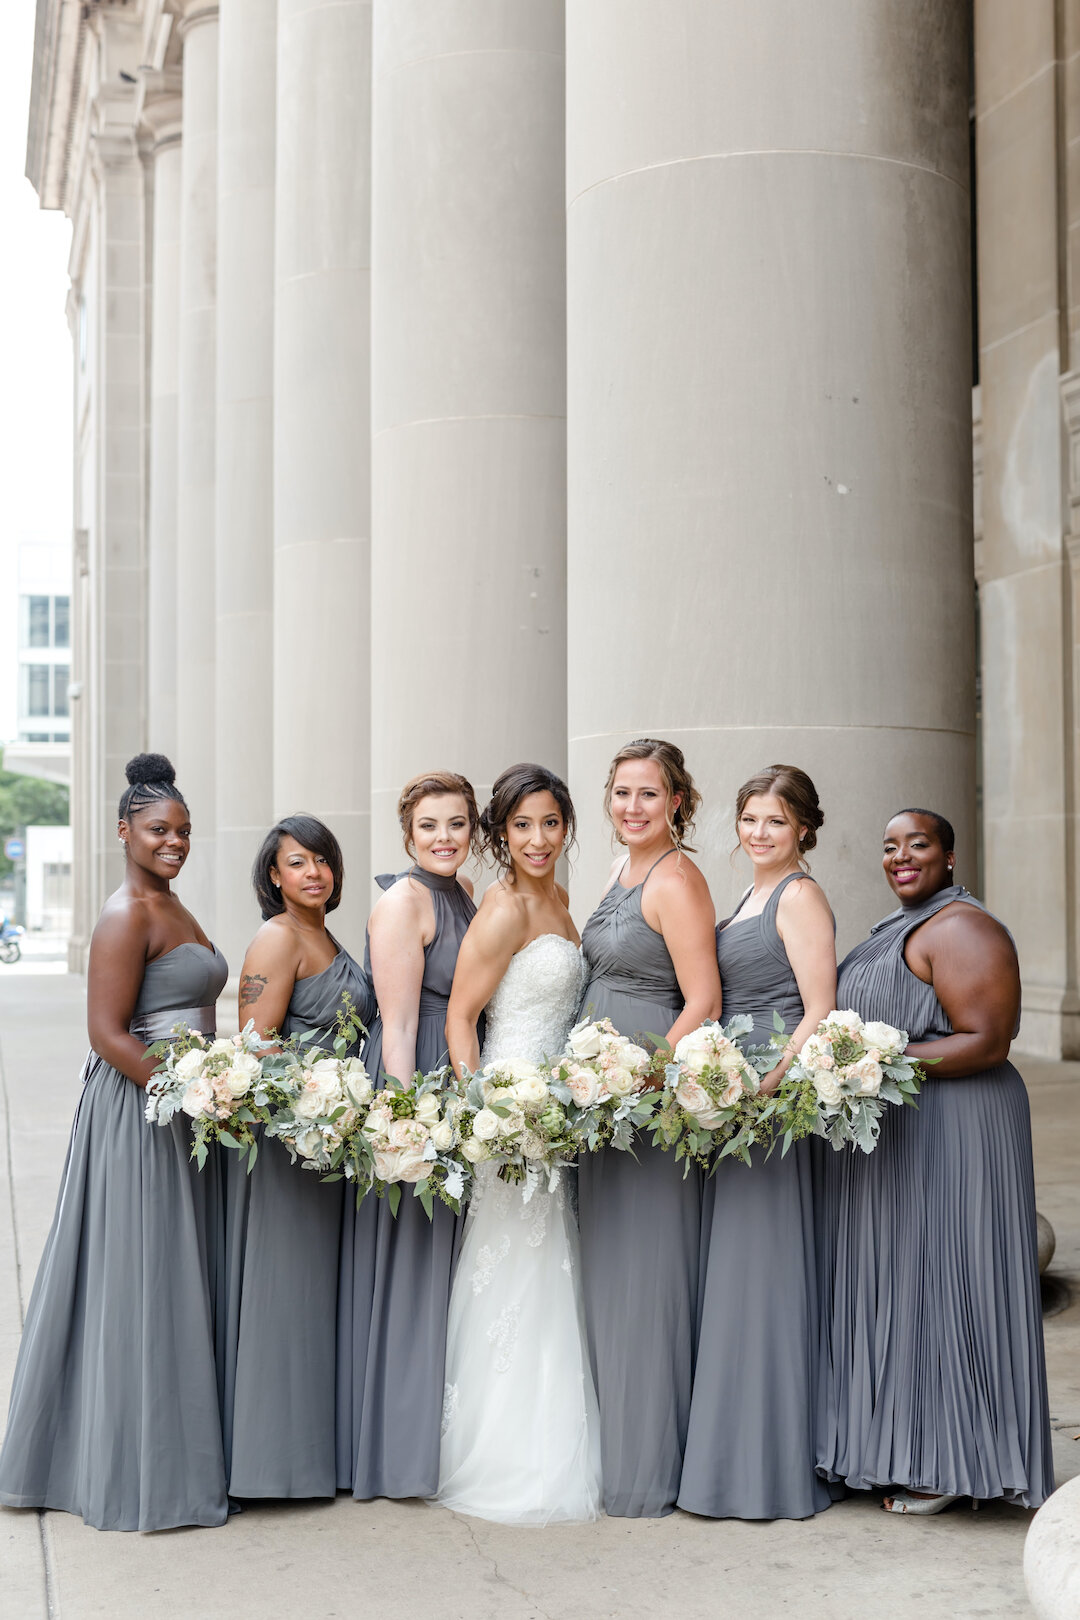 Romantic Chicago wedding at Room 1520 captured by Something Blue Photography Designed. See more elegant wedding ideas at CHItheeWED.com!